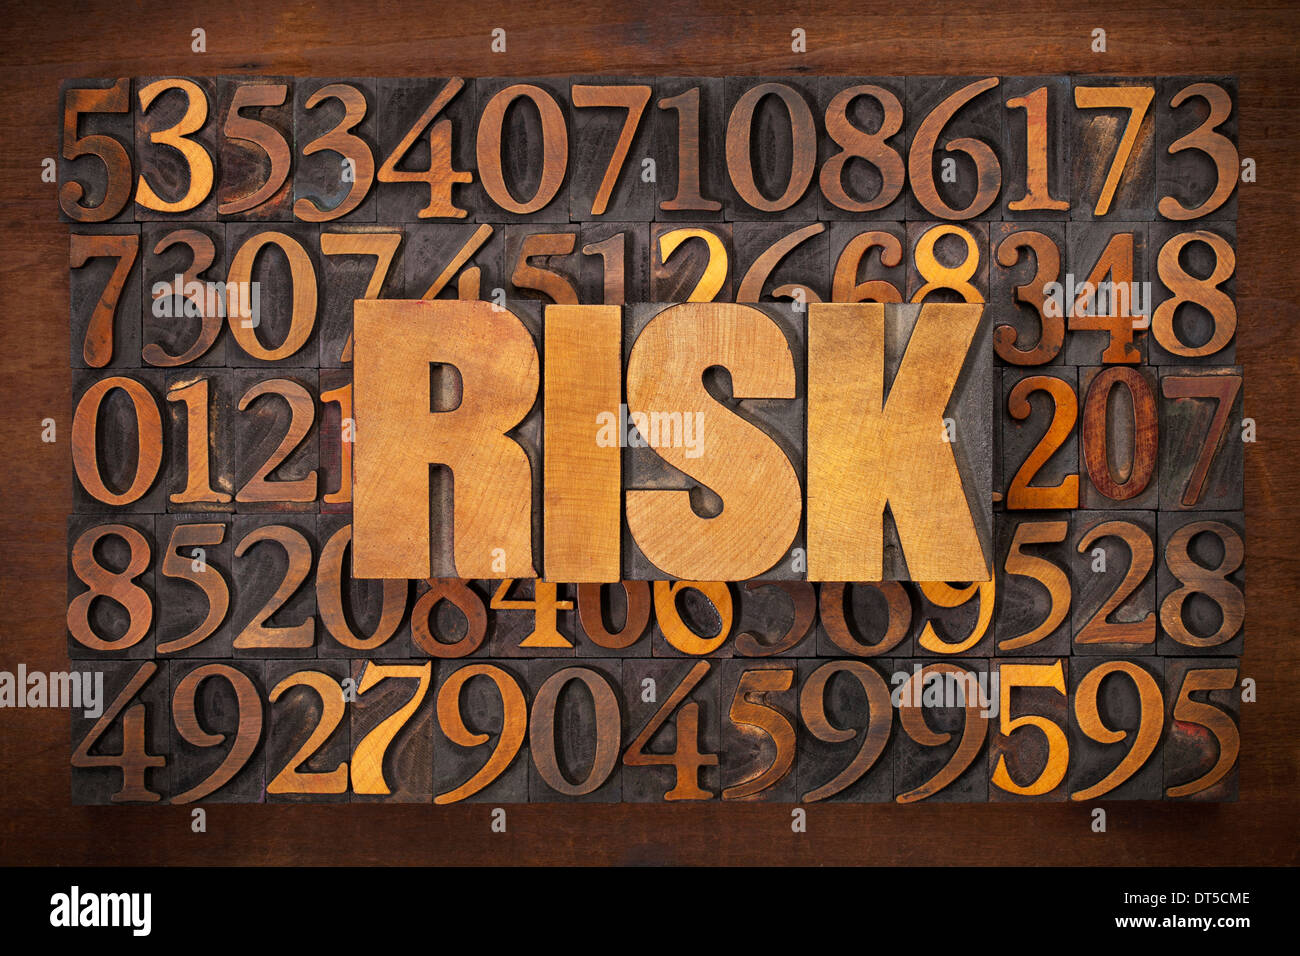 risk word - letterpress wood type text against number background Stock Photo